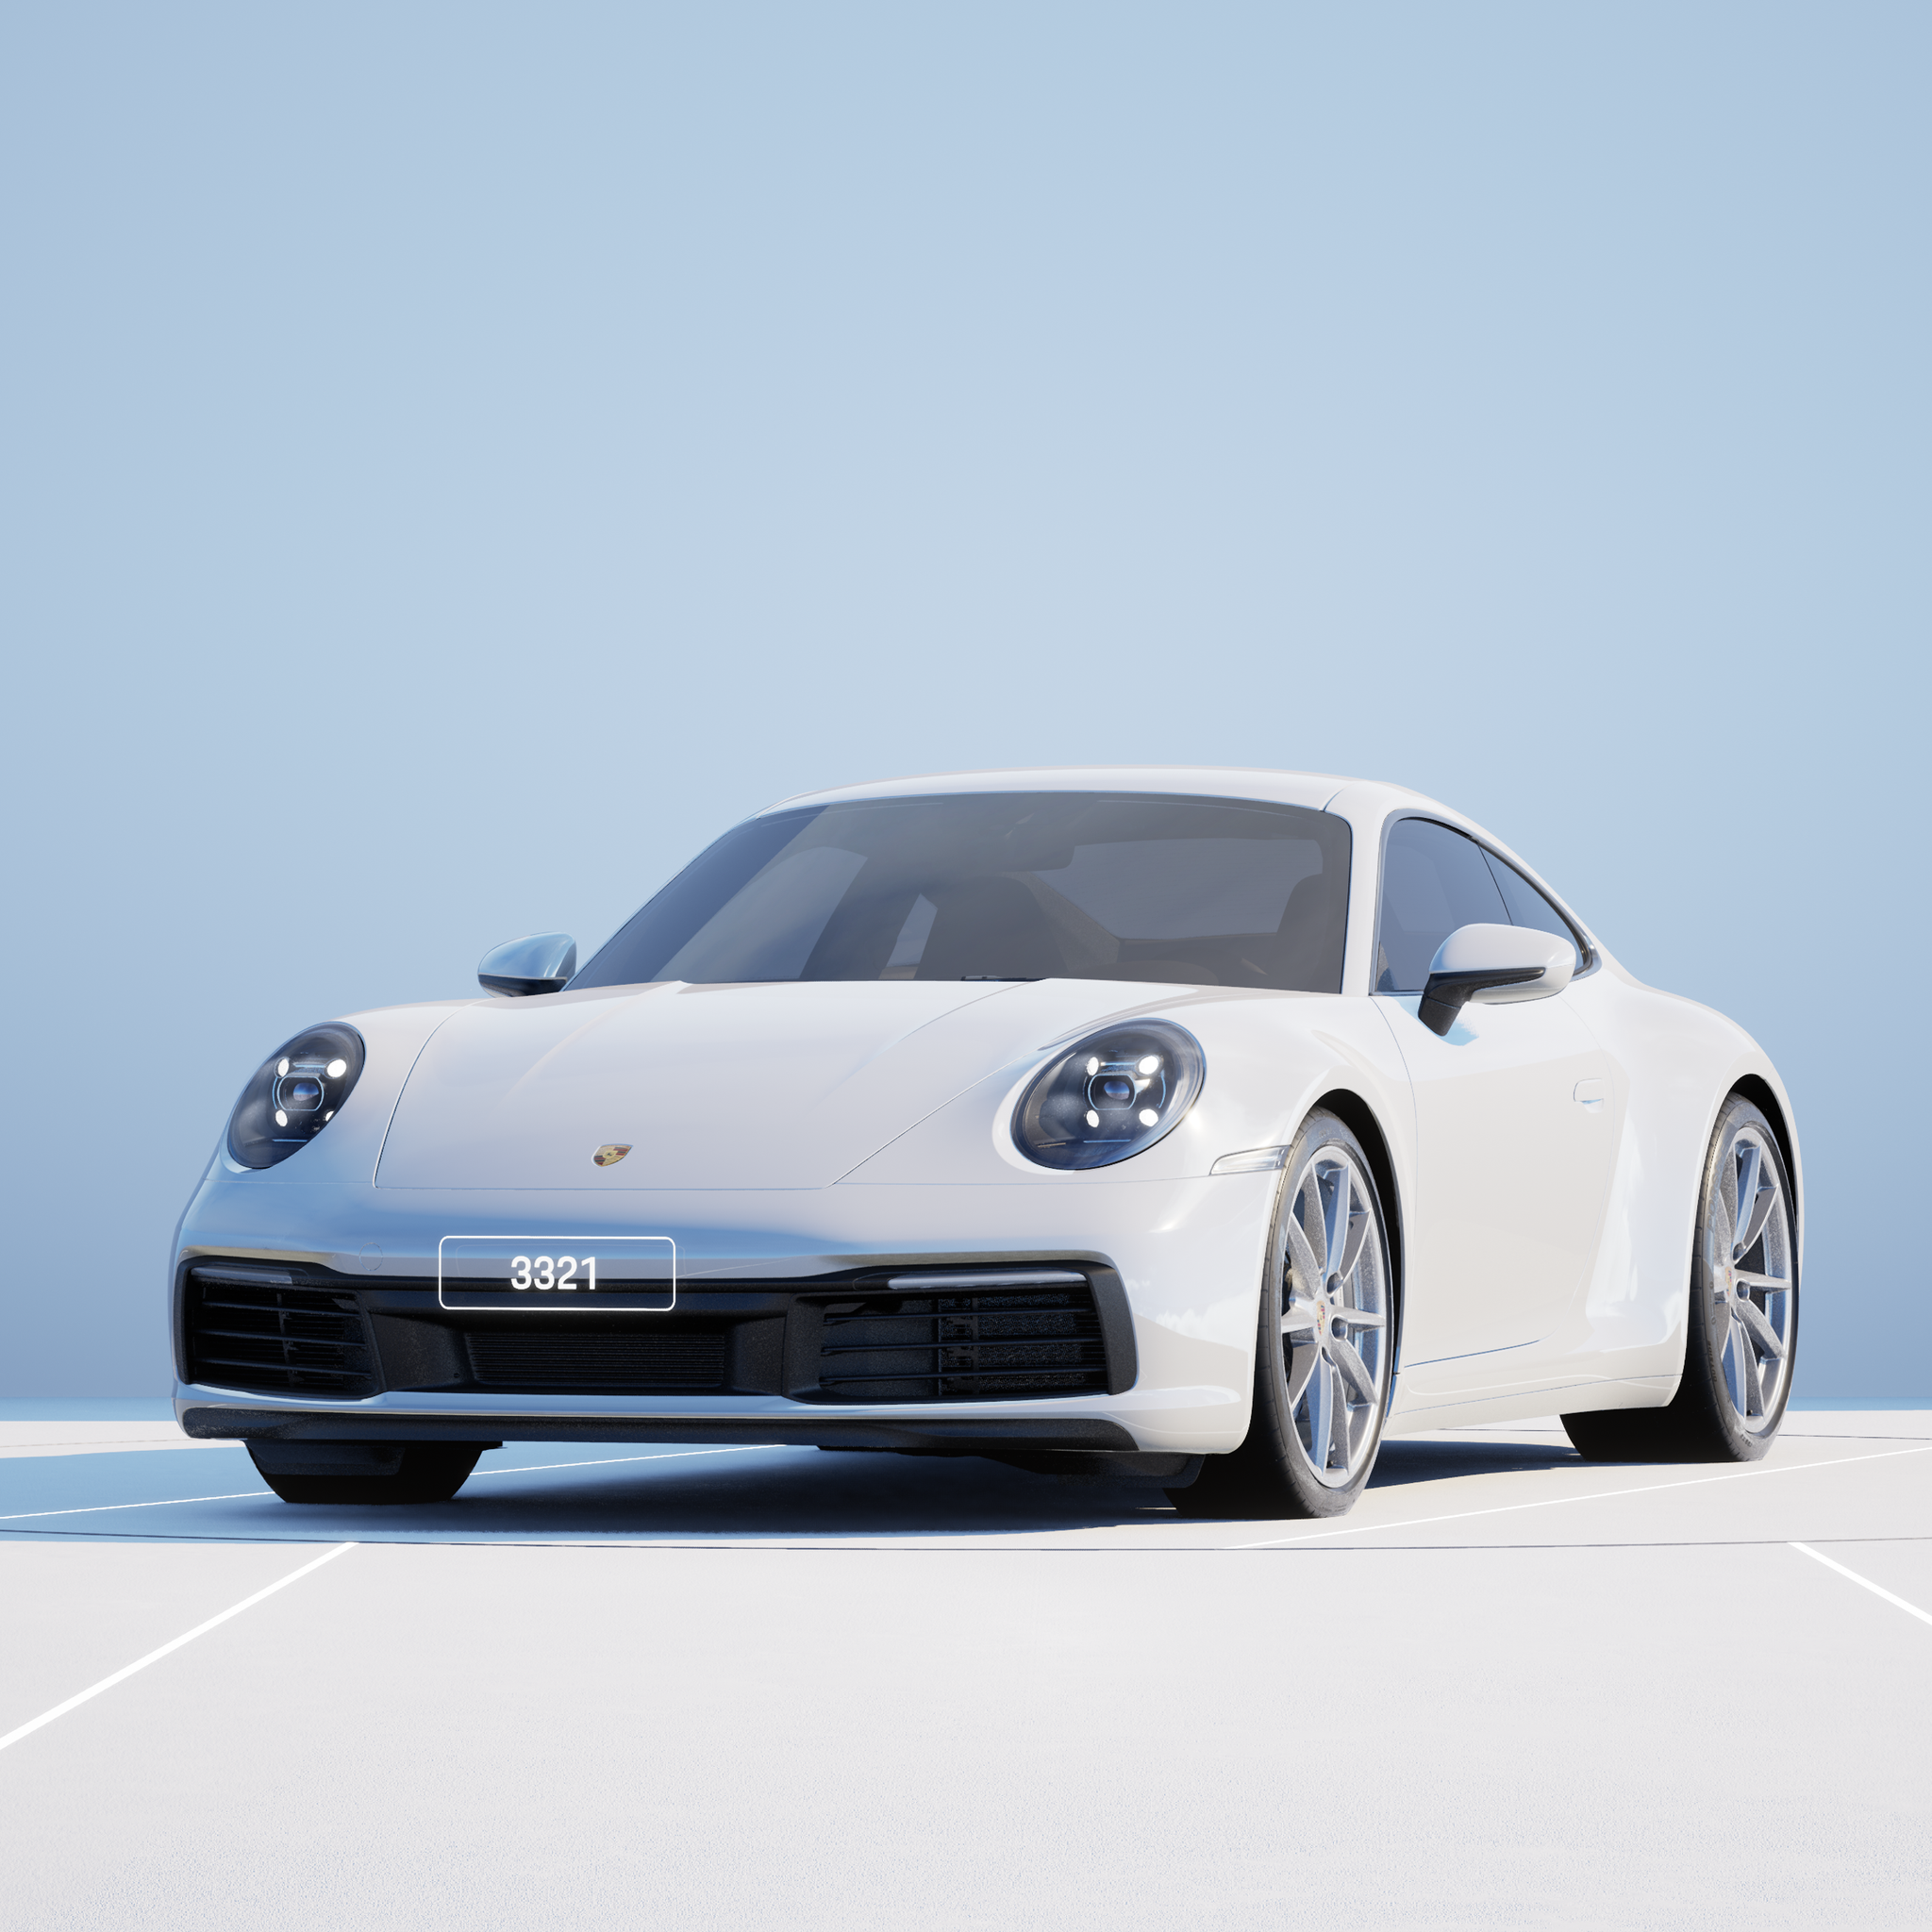 The PORSCHΞ 911 3321 image in phase